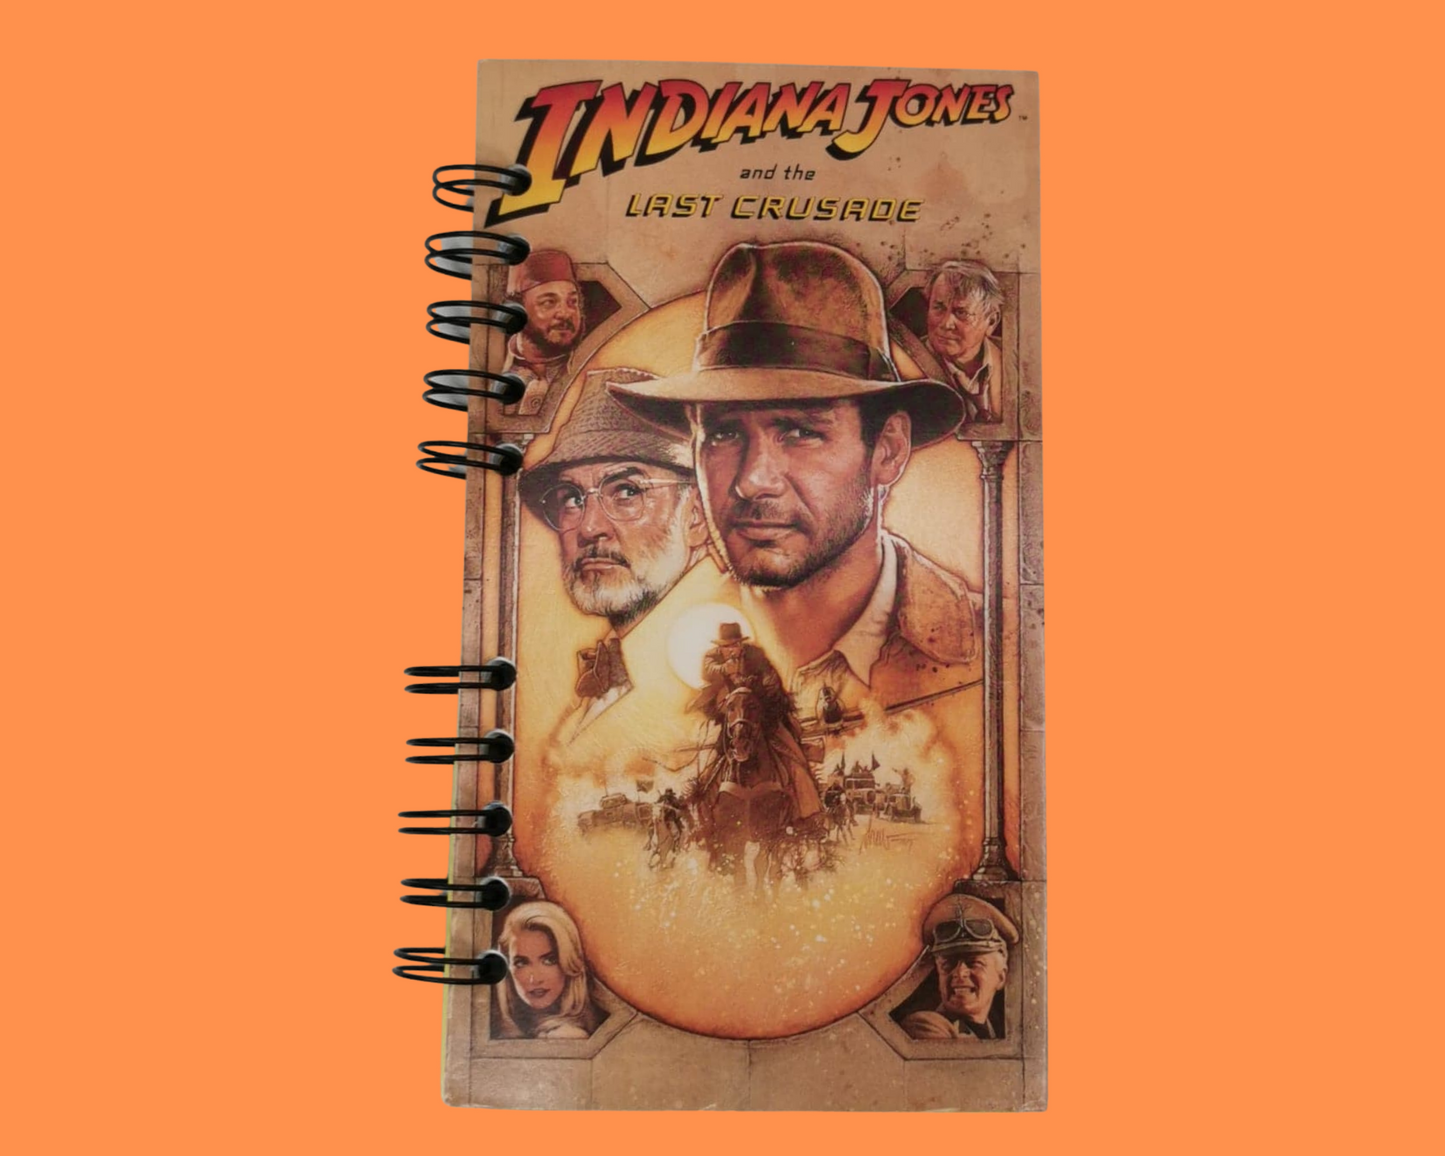 Indiana Jones and the Raiders and the Last Crusade VHS Movie Notebook